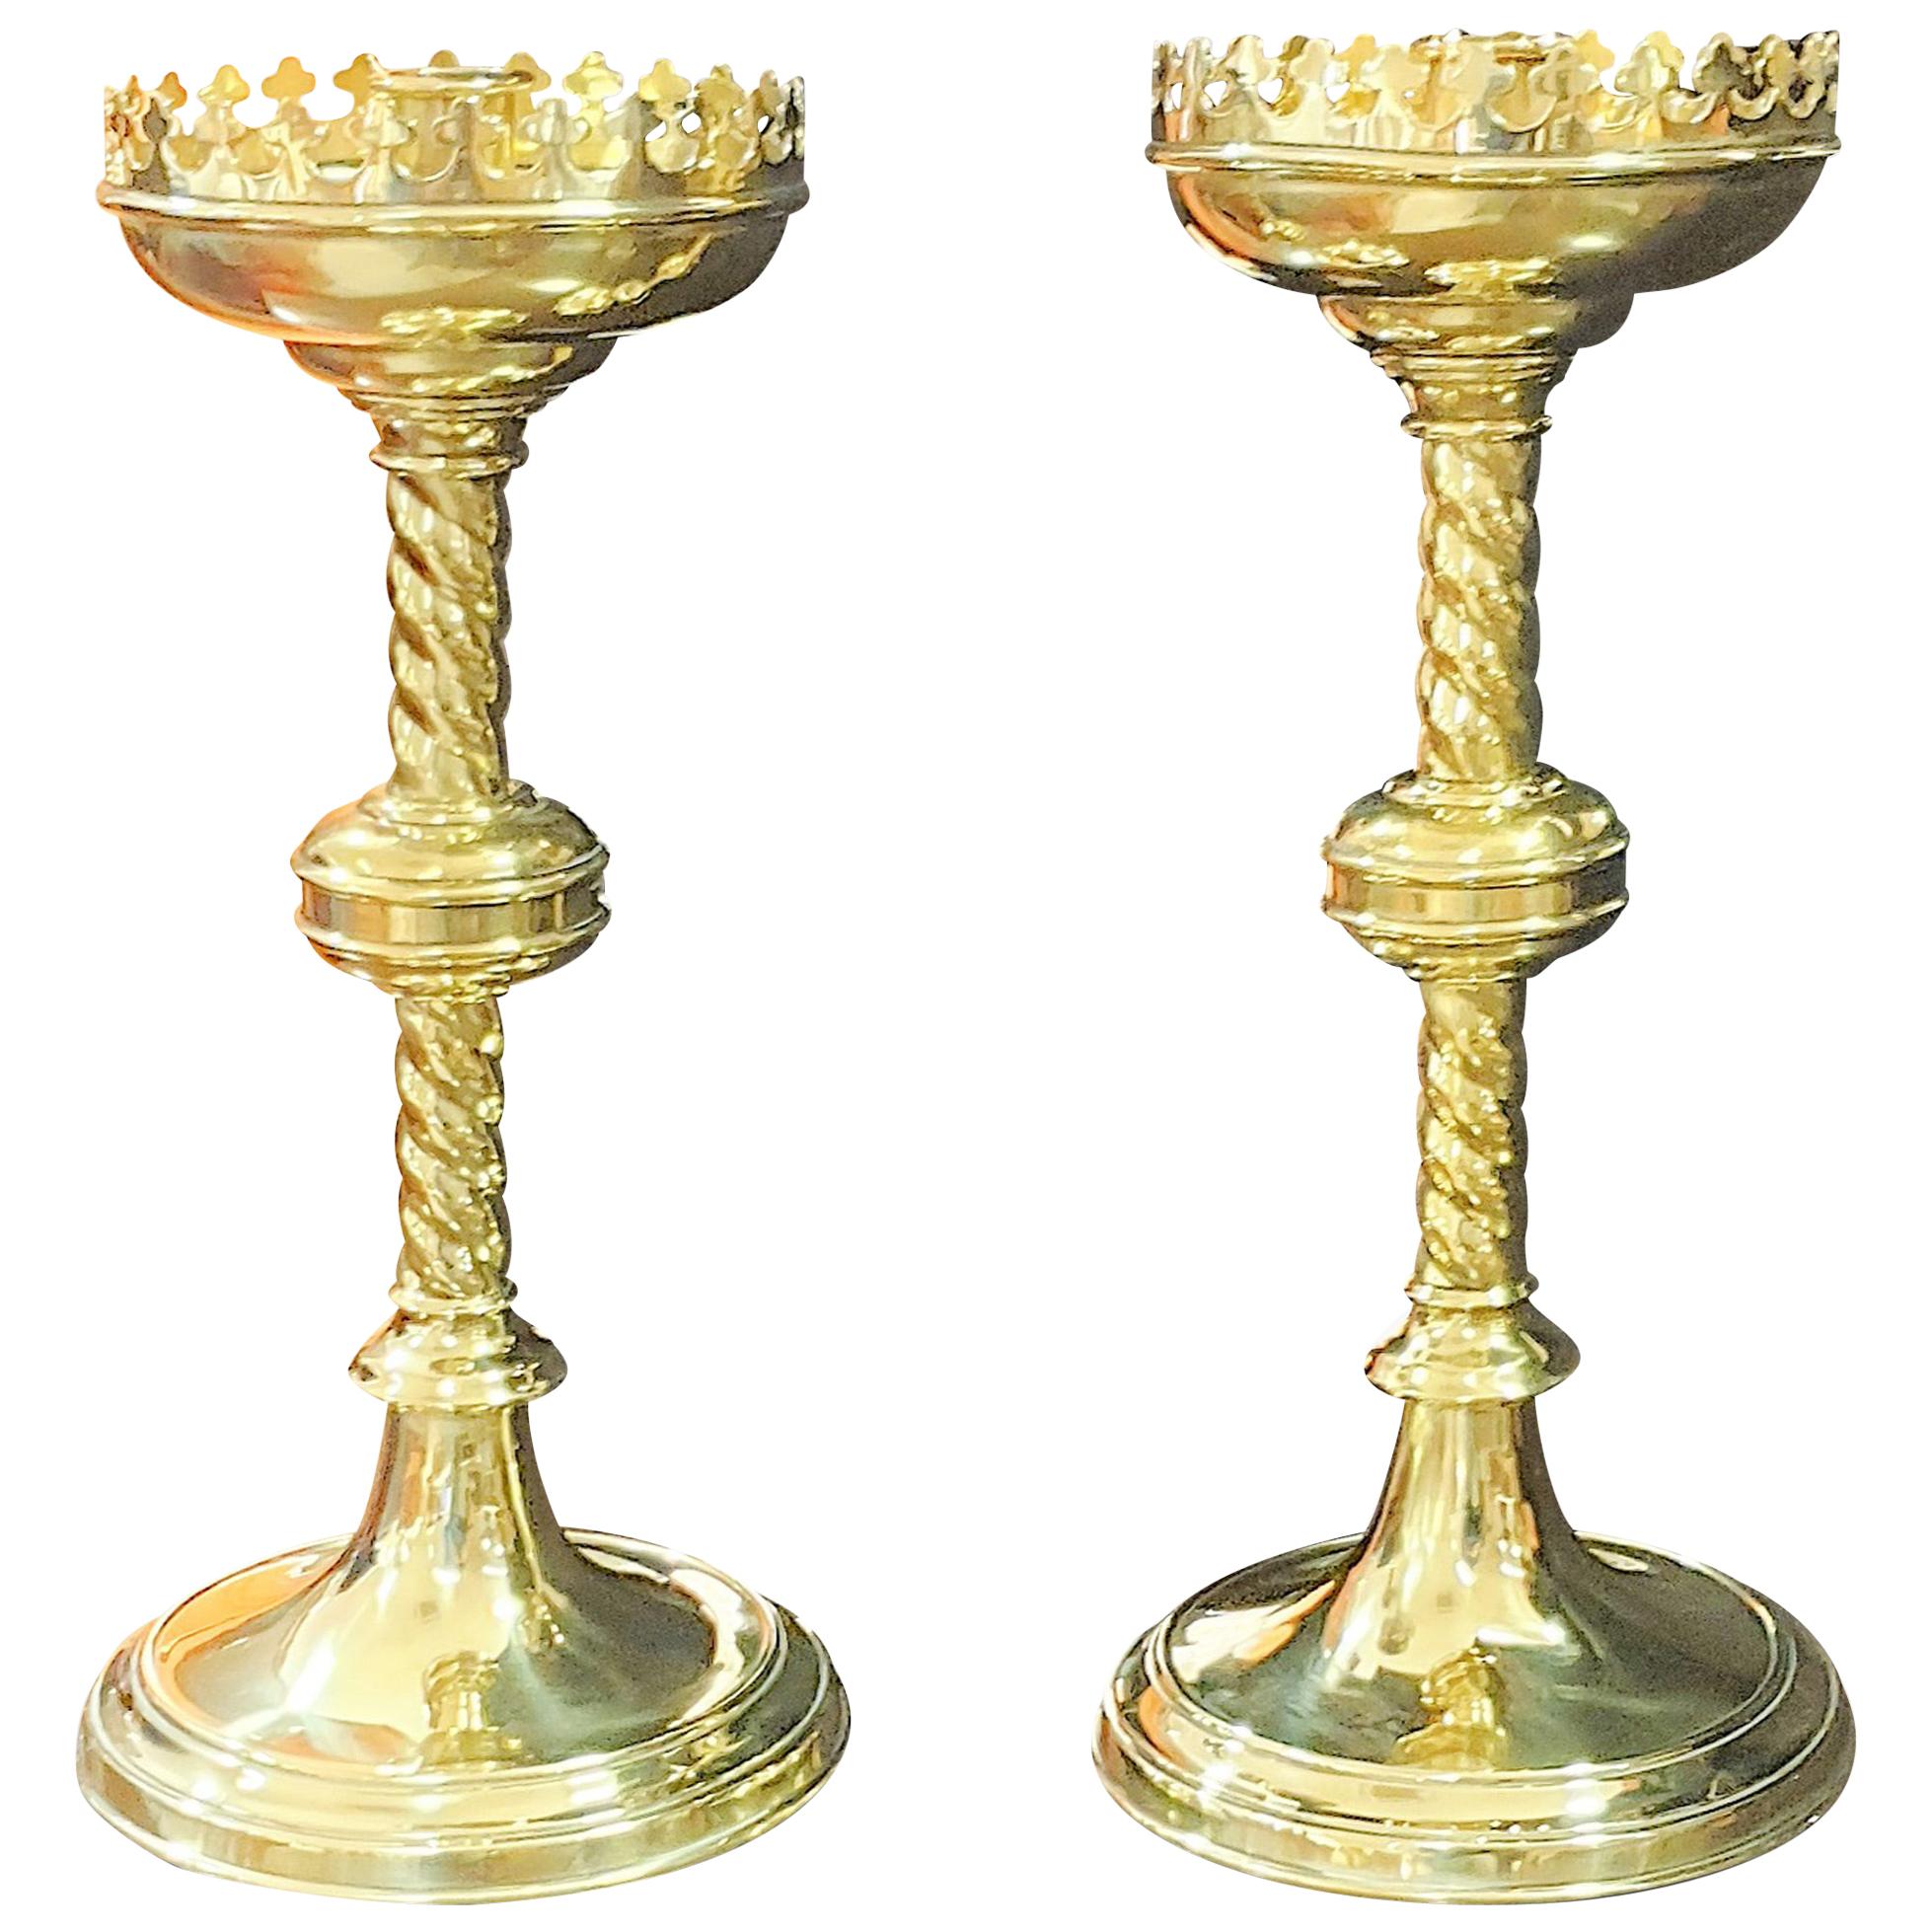 Gothic Revival Brass Candlesticks For Sale